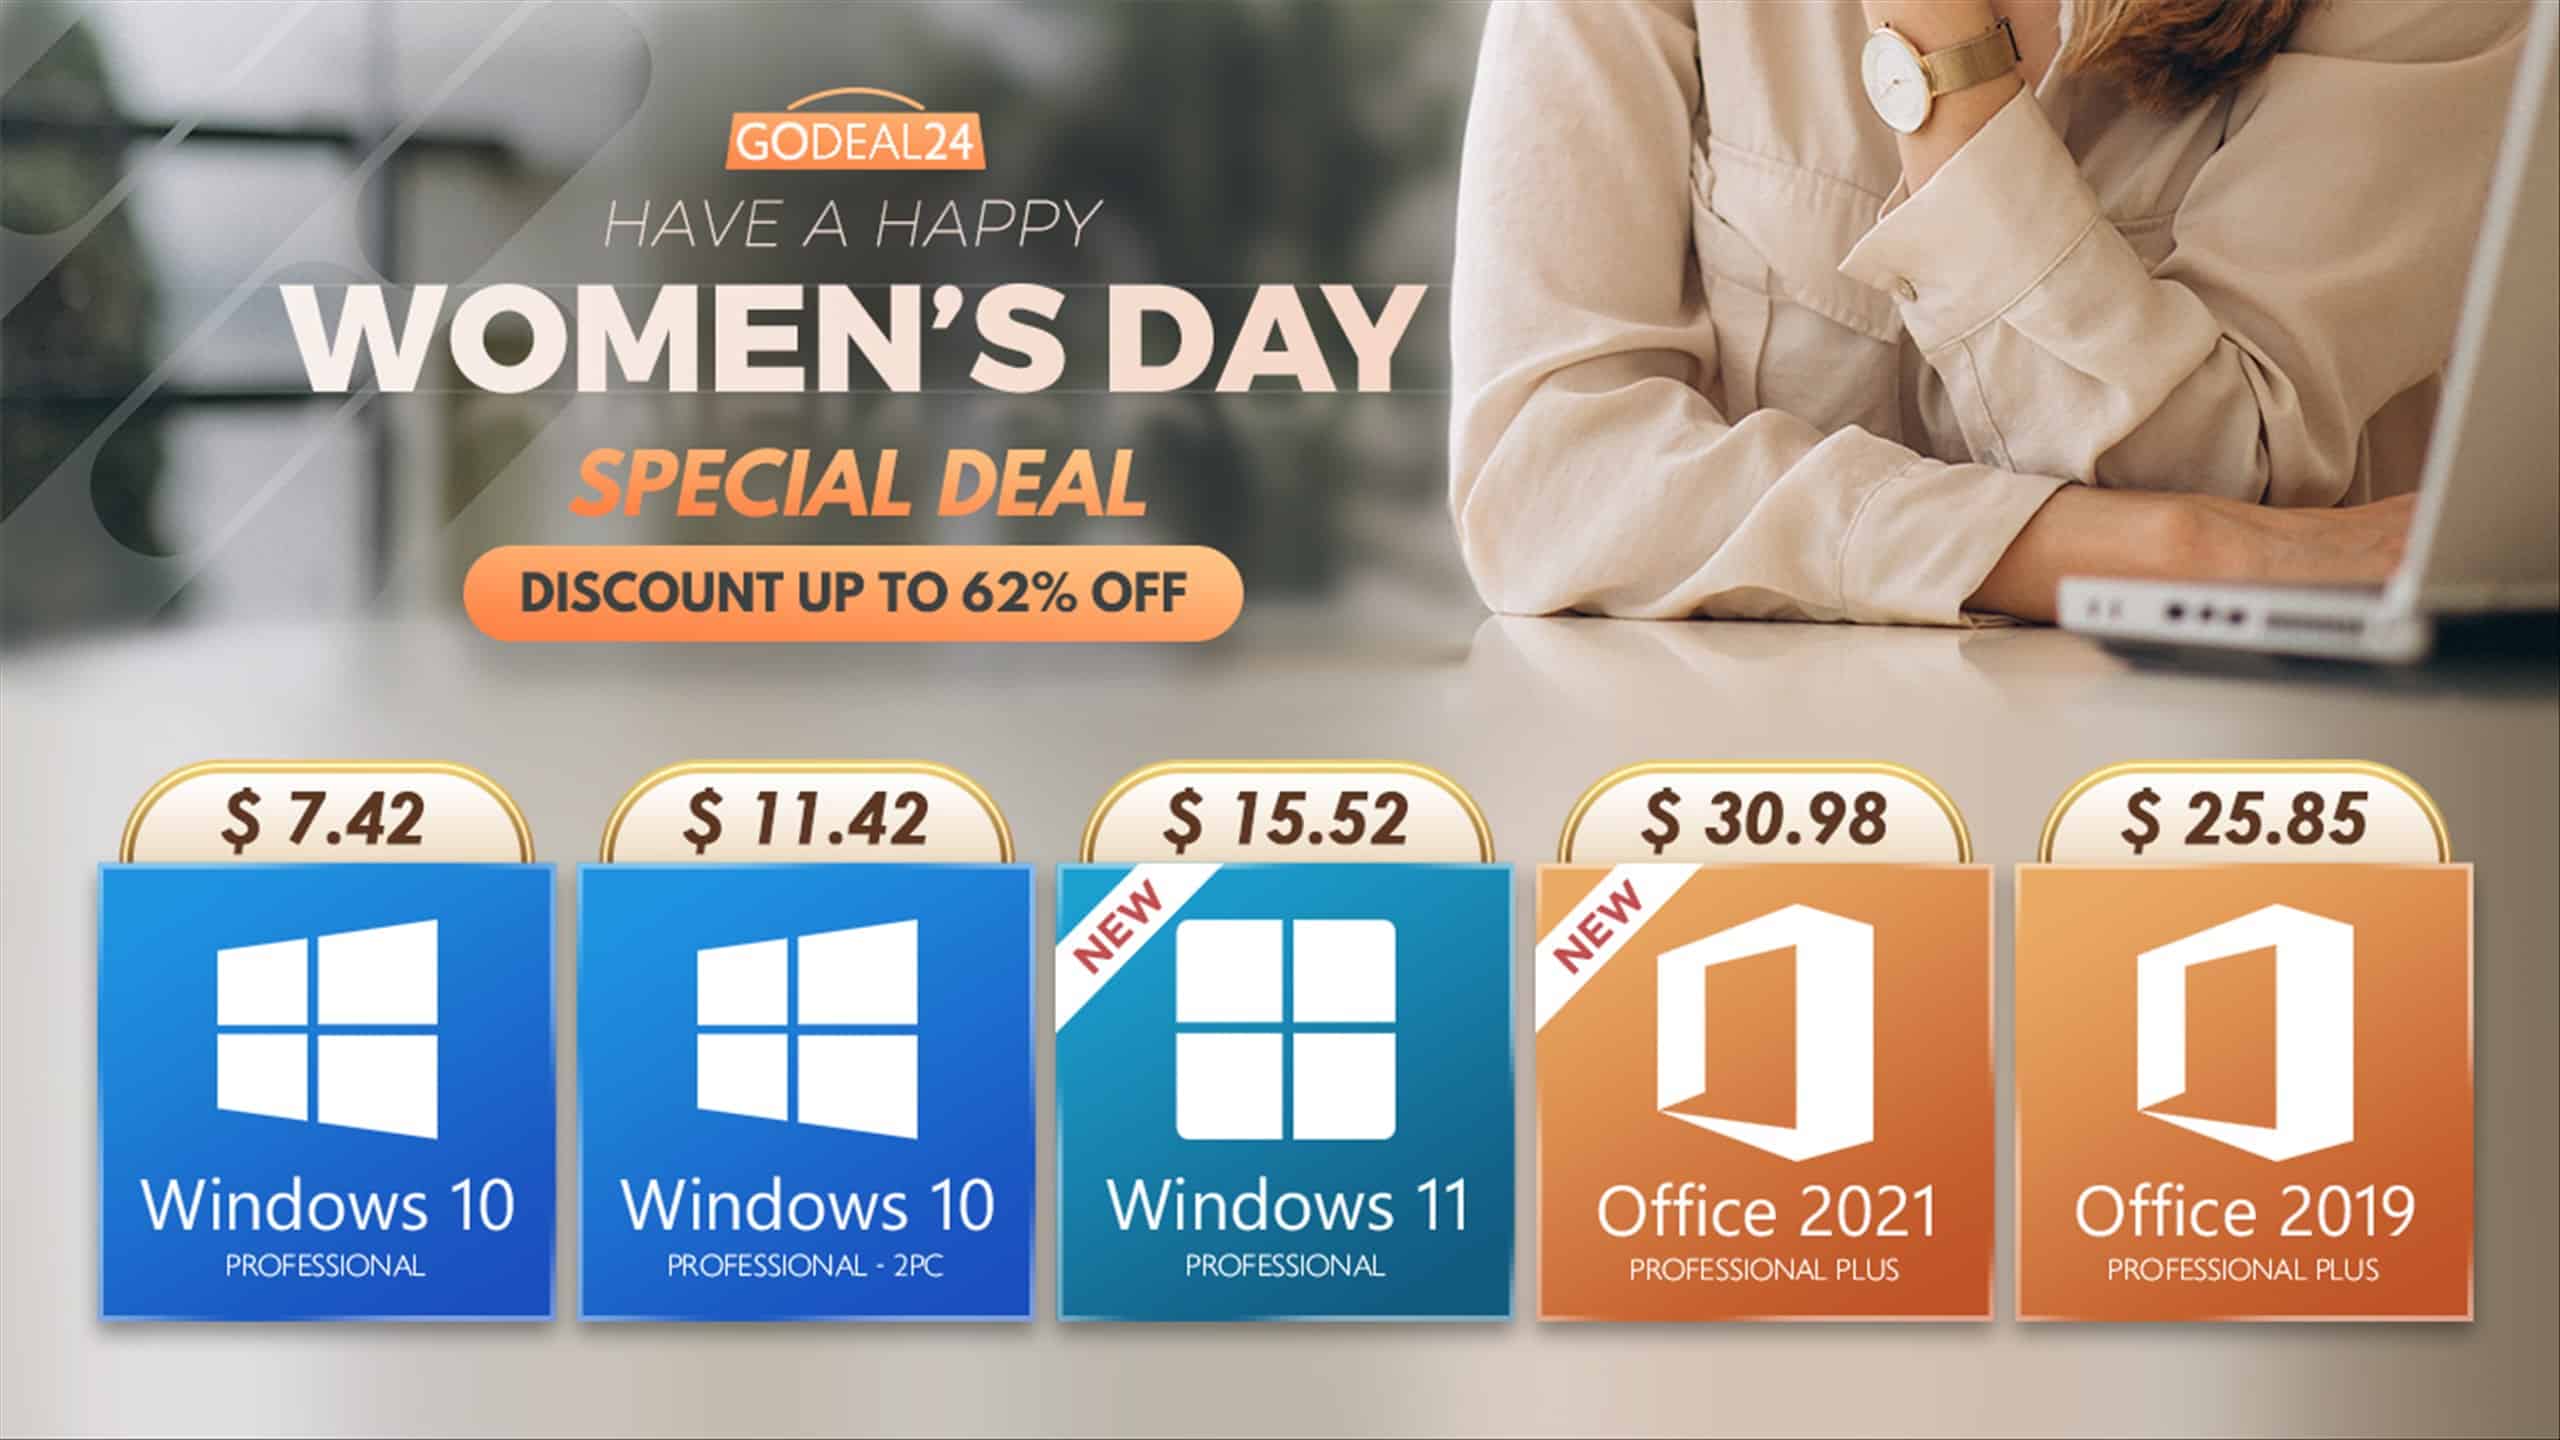 How to get Cheap and Genuine Microsoft Software? All Hot Microsoft Software up to 62% off at Godeal24!